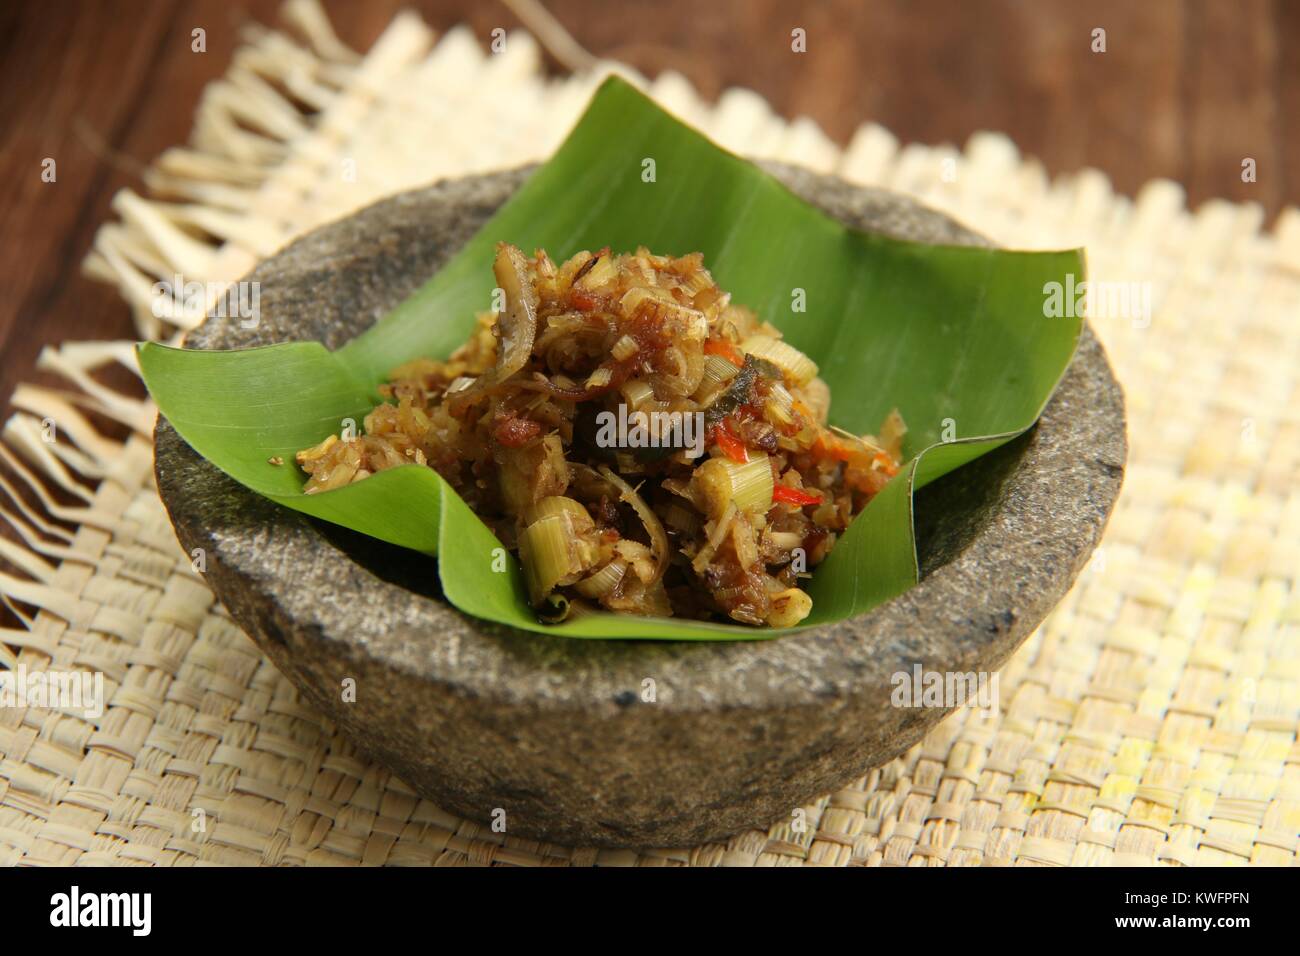 Sambal Sere Tabia. Balinese spicy relish of chili peppers and lemongrass. Stock Photo